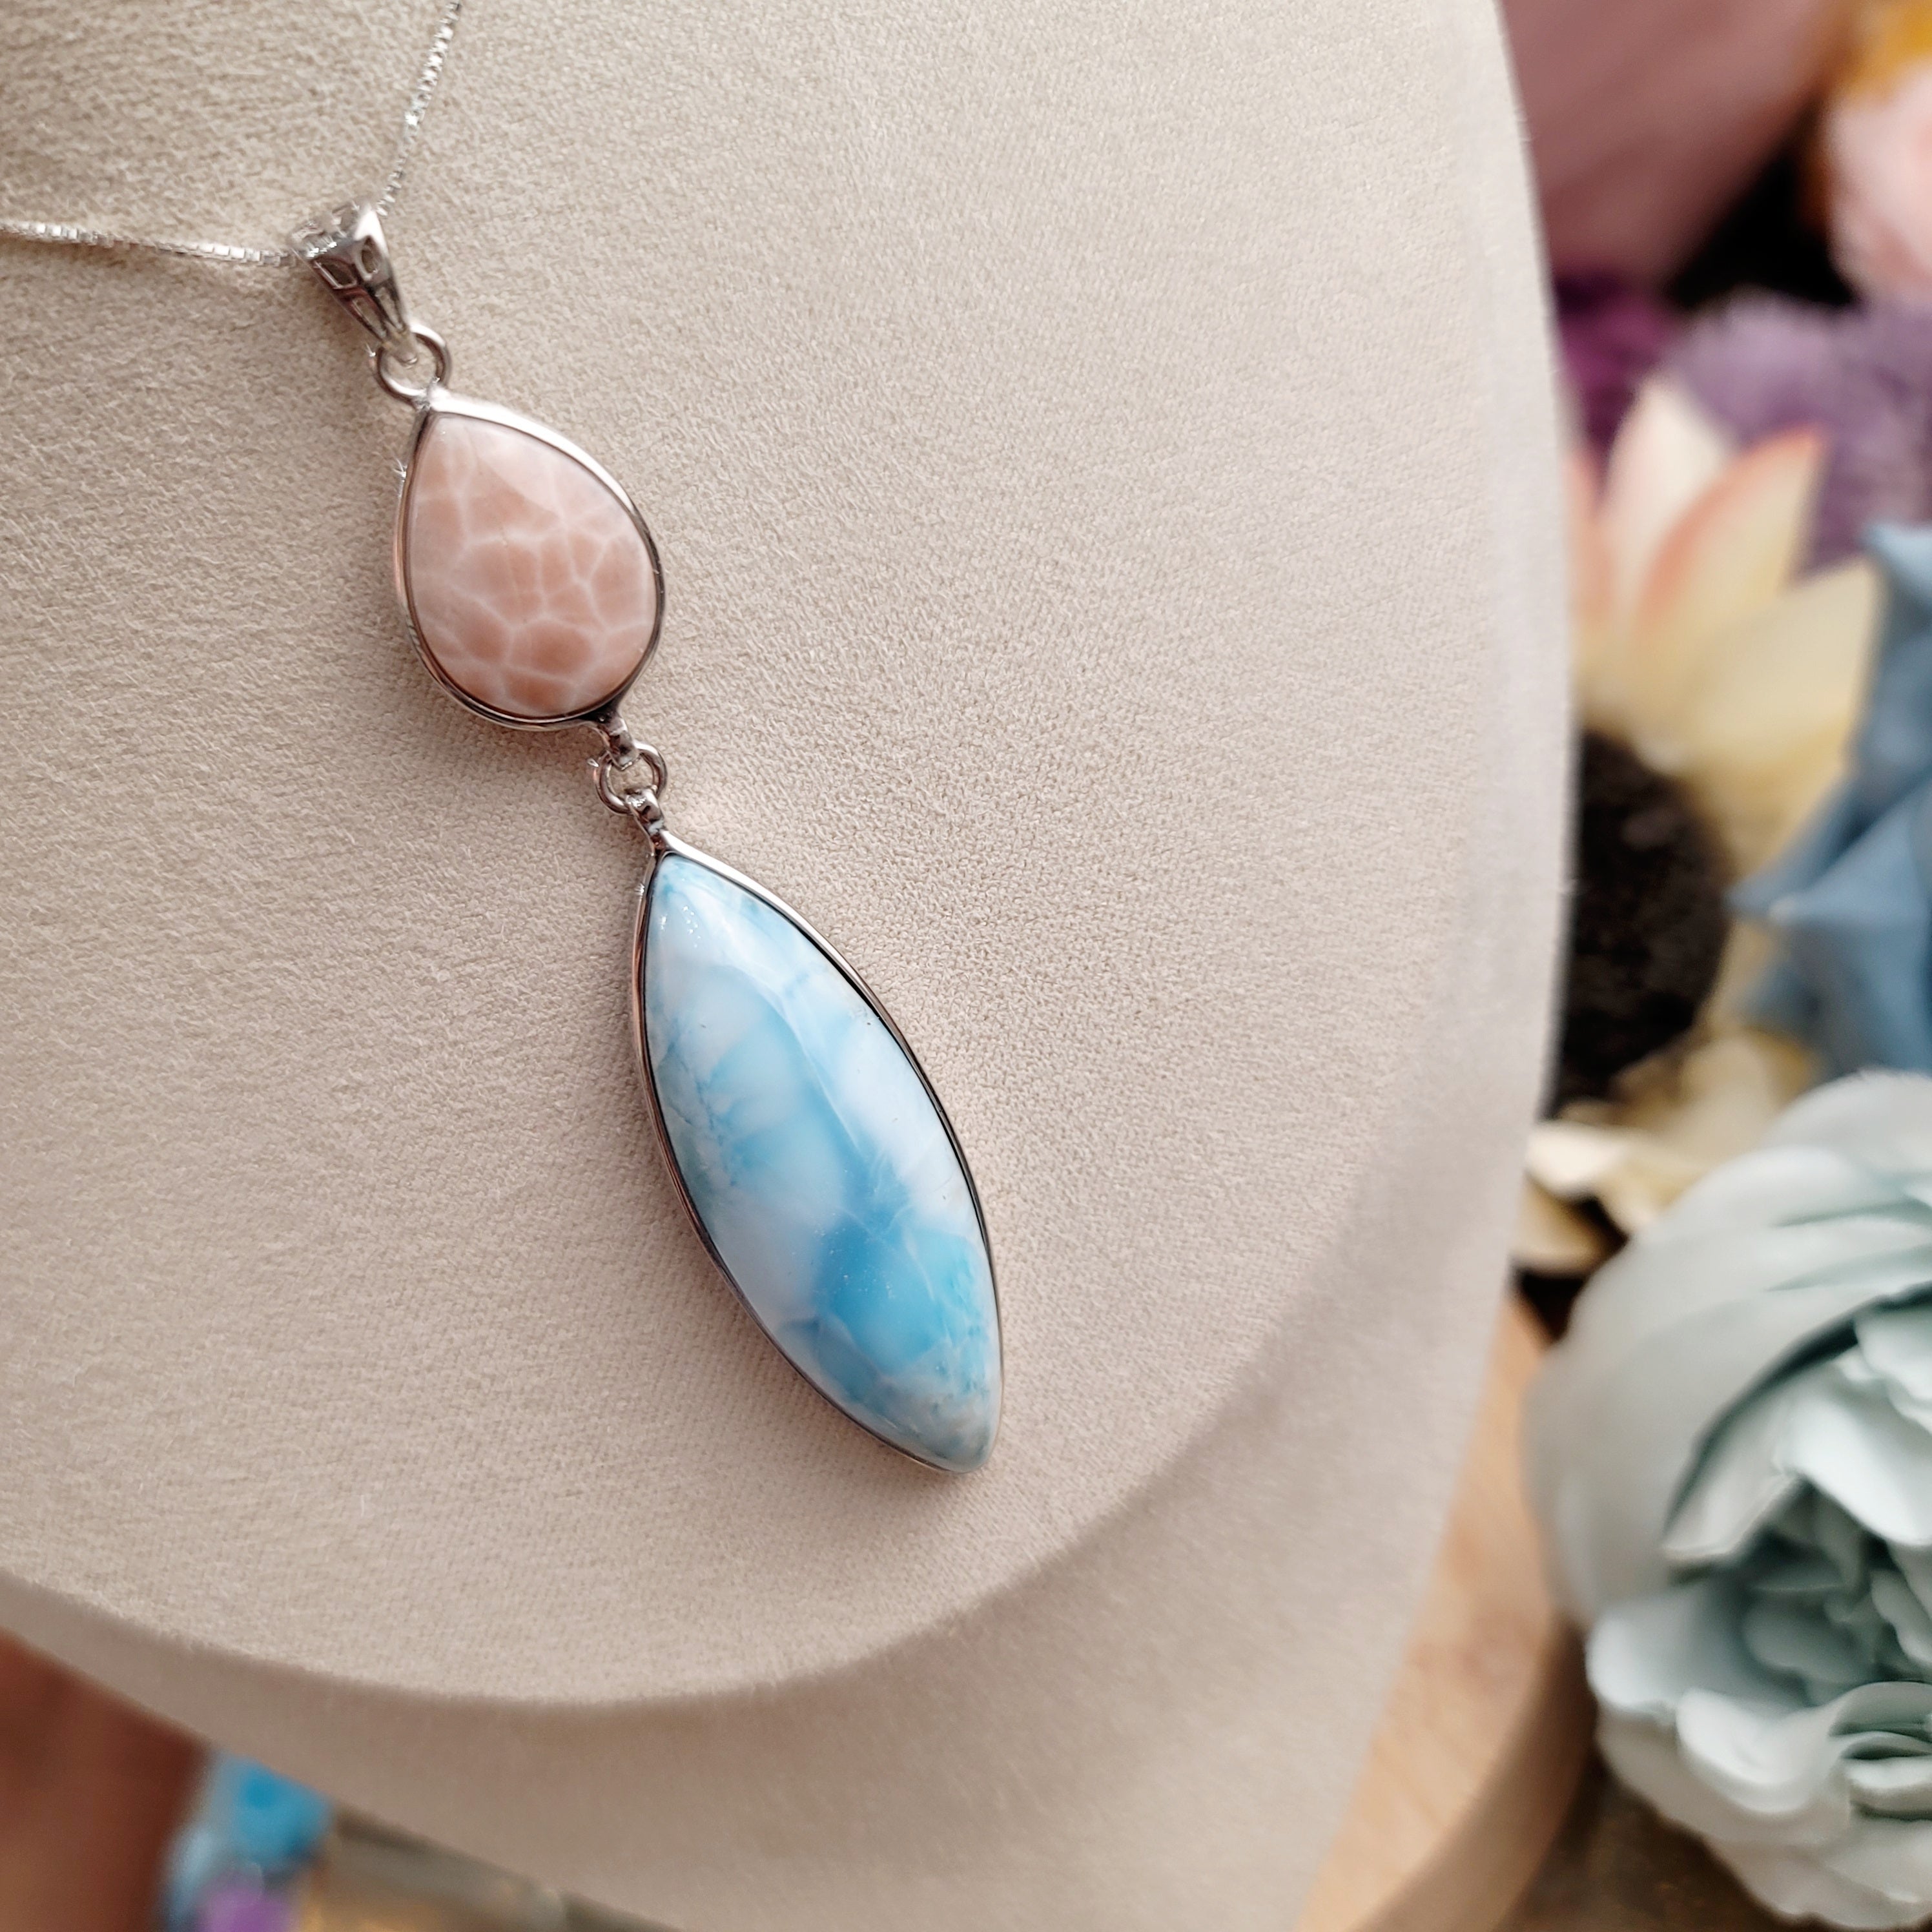 Larimar and Natrolite Necklace for Awakening your Intuitive Powers and Tranquility